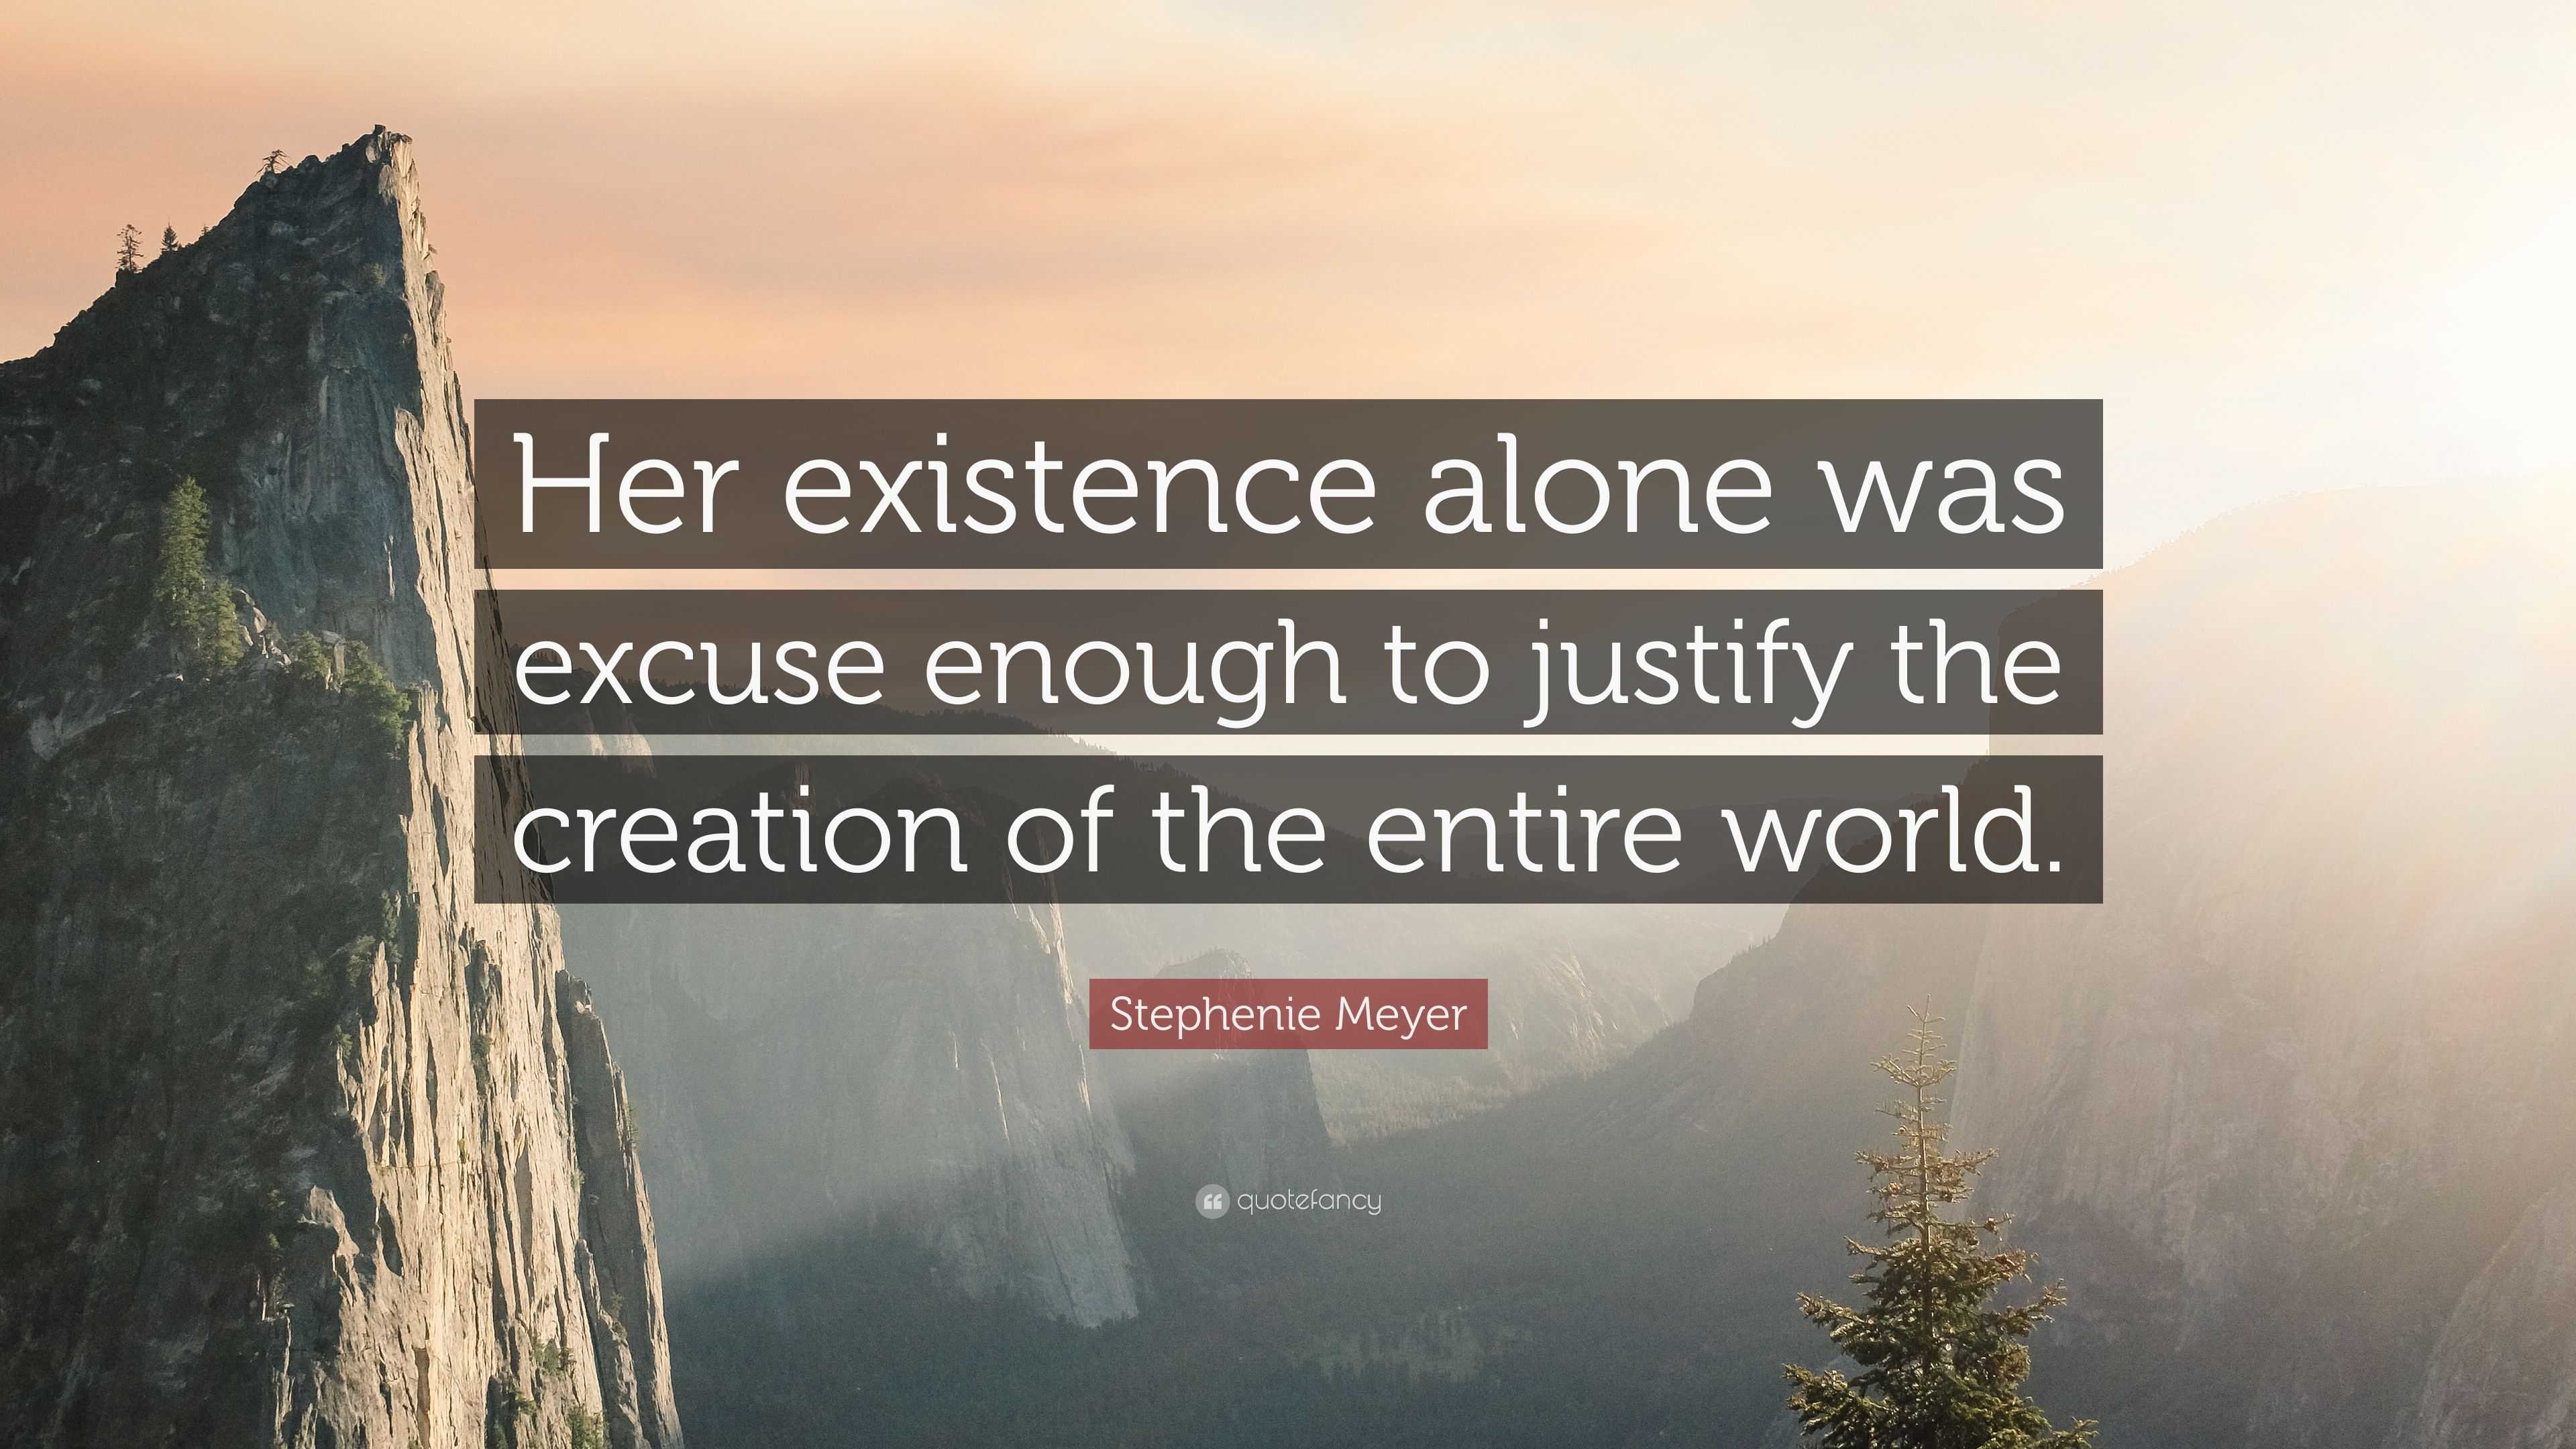 Stephenie Meyer Quote: “Her existence alone was excuse enough to ...